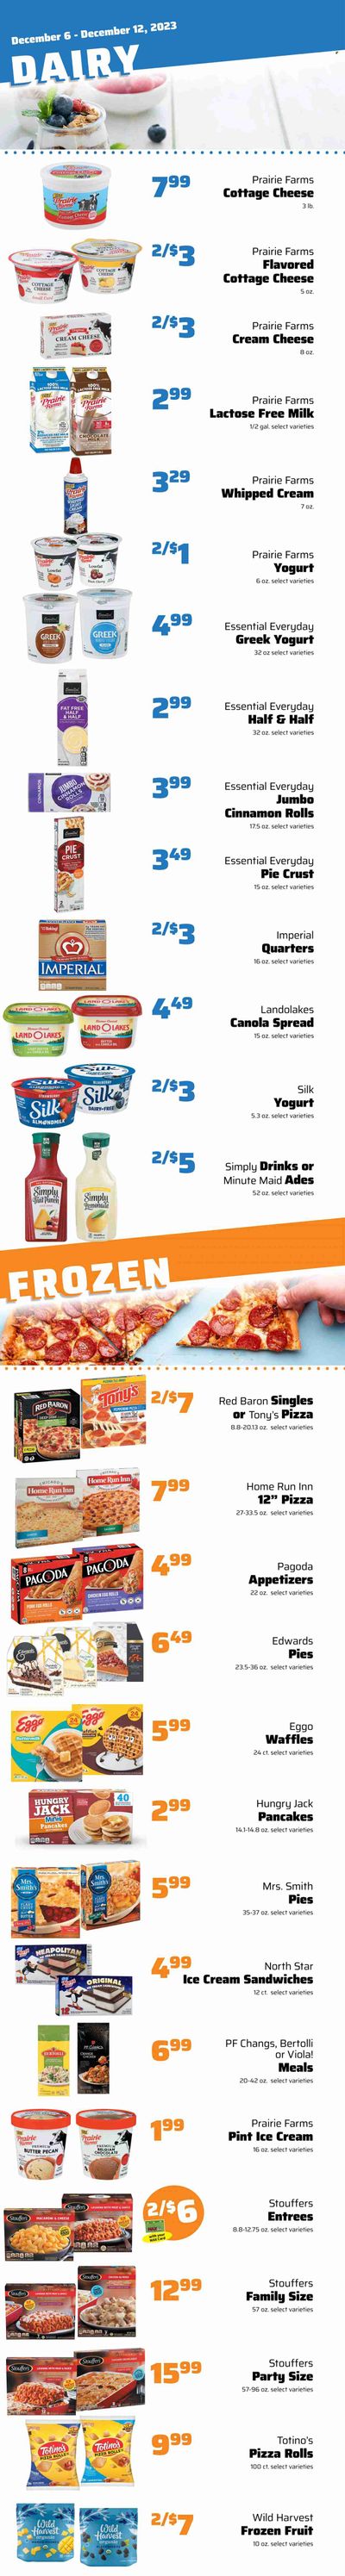 County Market (IL, IN, MO) Weekly Ad Flyer Specials December 6 to December 12, 2023